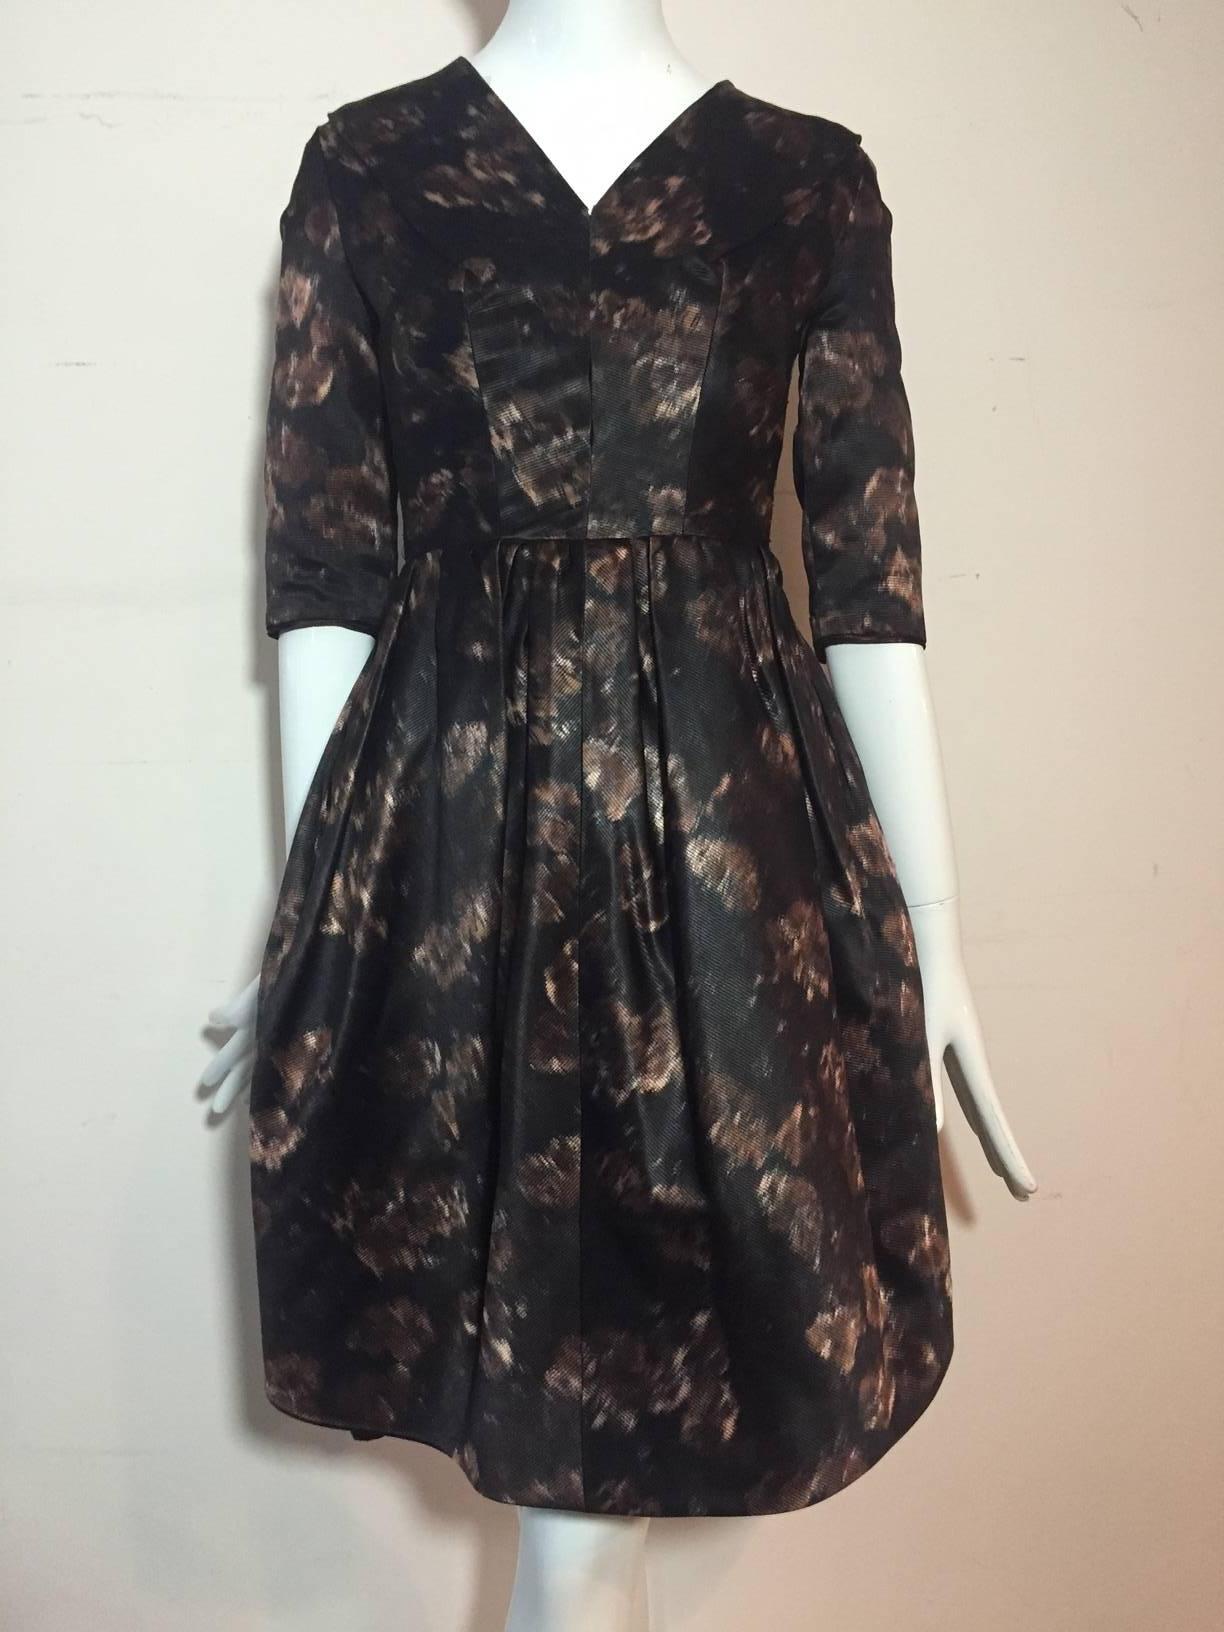 A fabulous 1950s abstract floral silk dress in black brown and taupe:  3/4 length sleeves, 